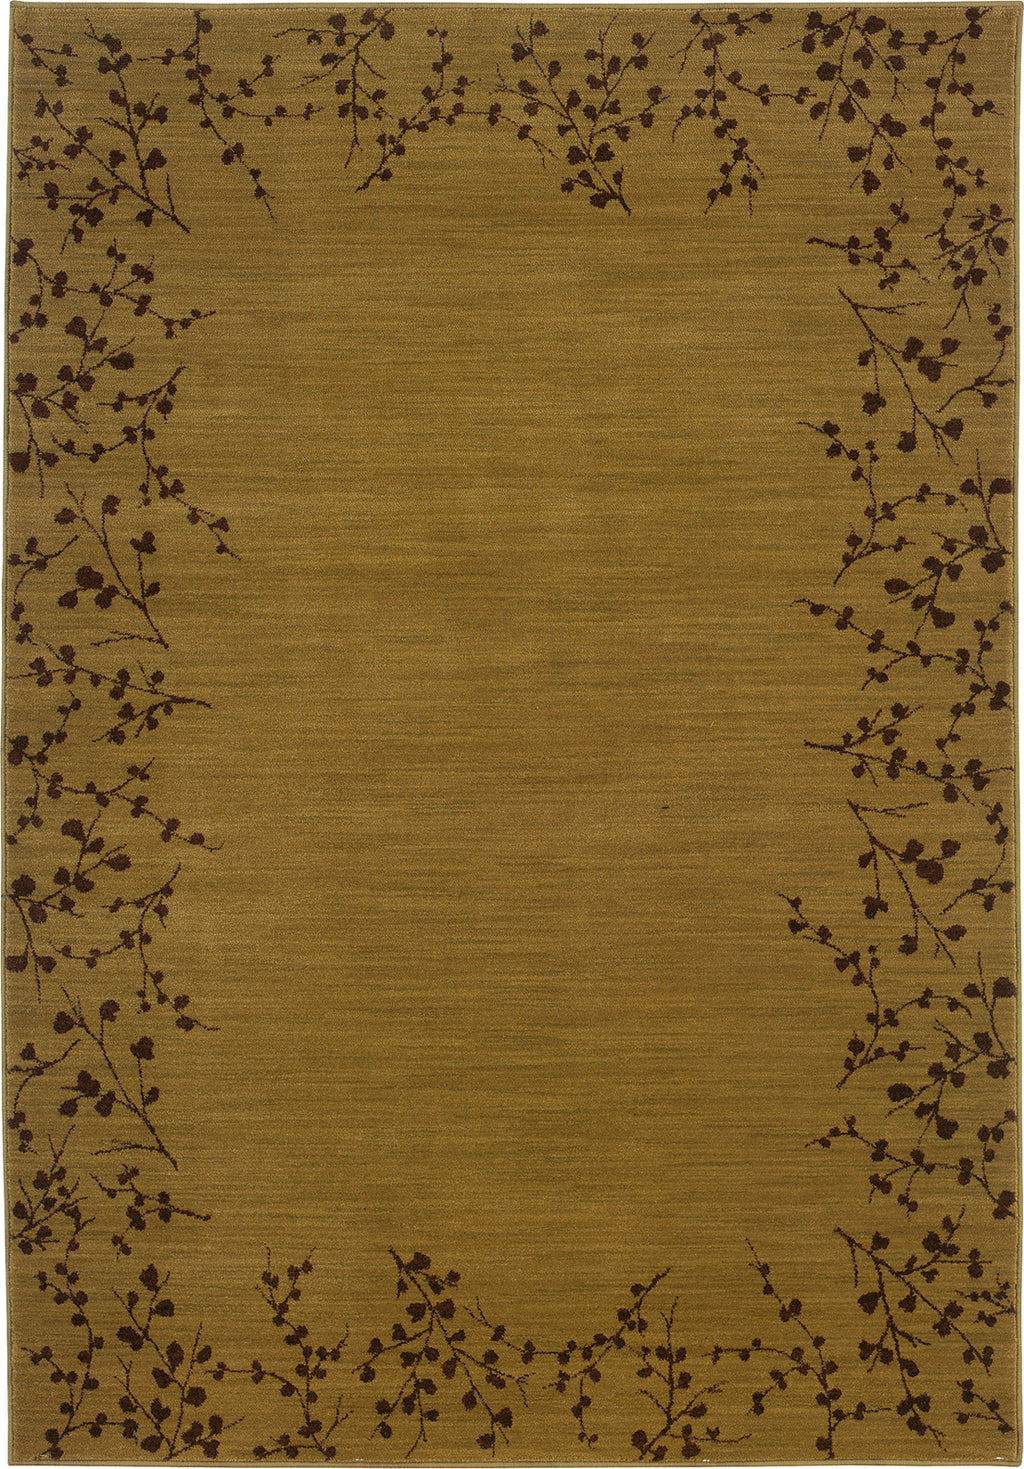 Oriental Weavers Allure 004B1 Gold/Brown Area Rug main image featured